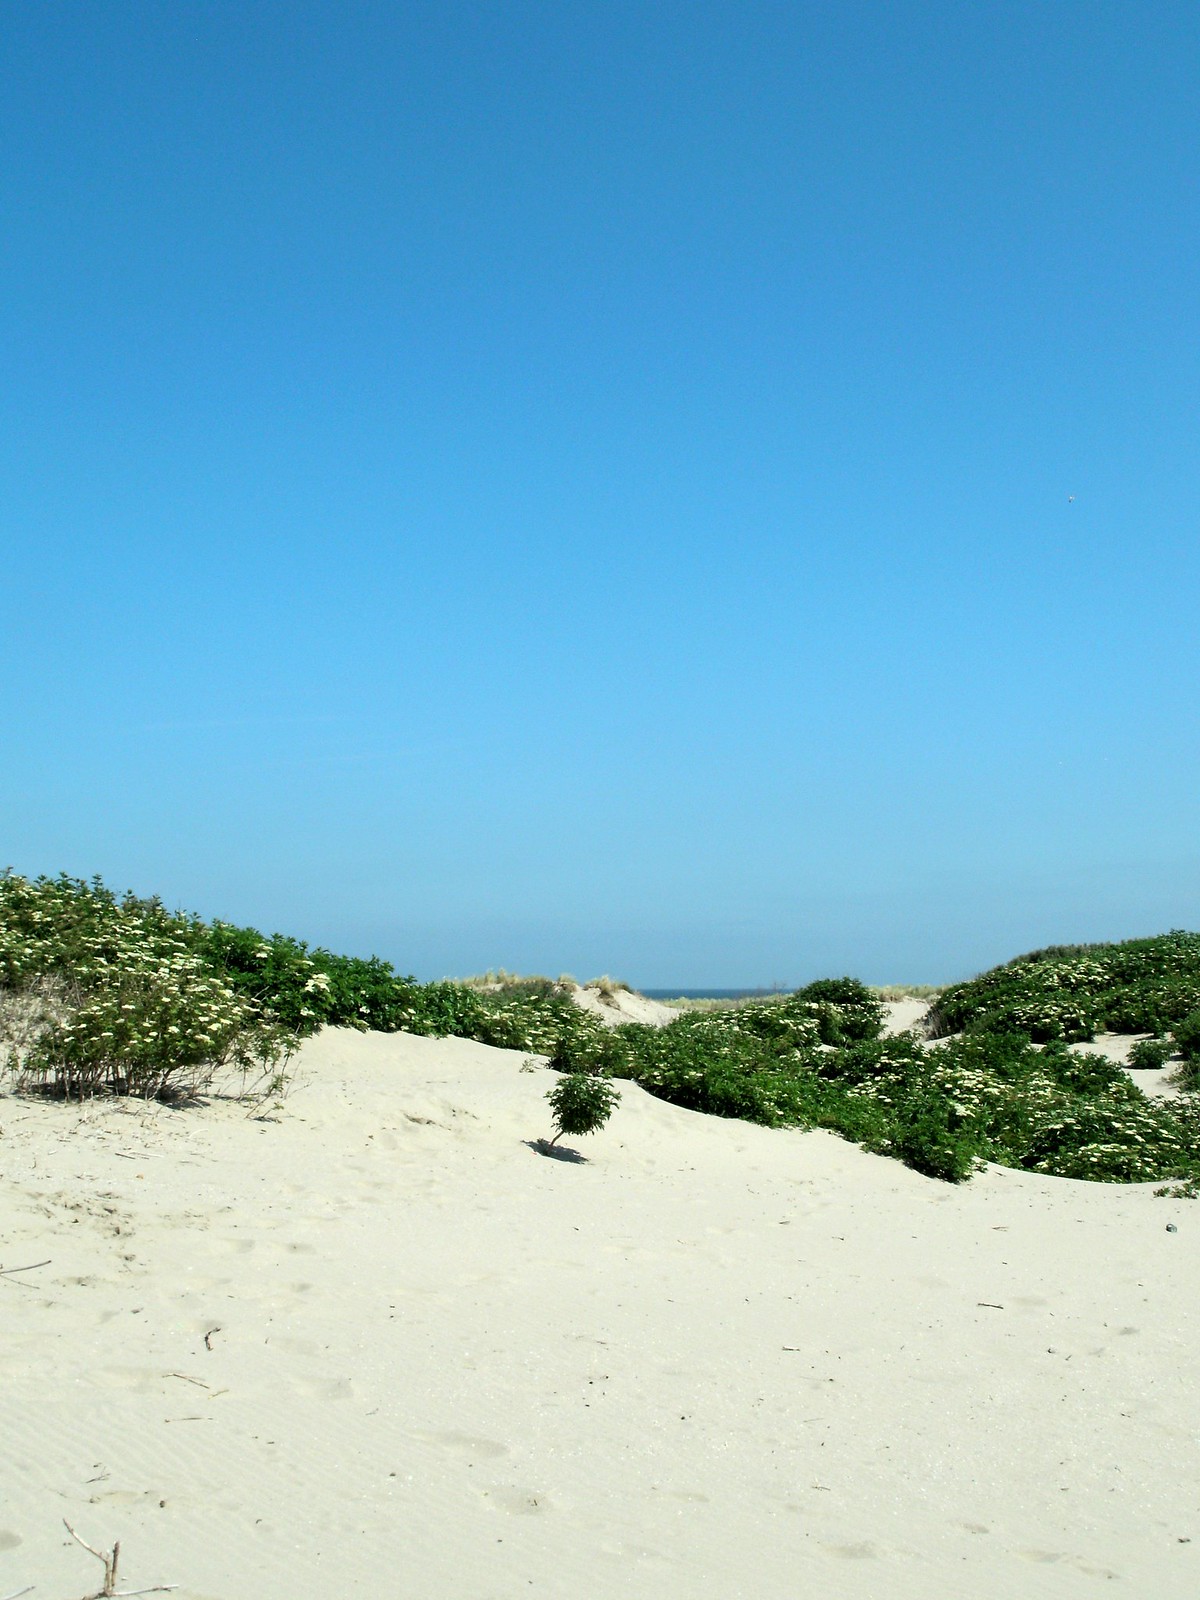 A view of the green vegetation and pale yellow sand at Hoek van Holland.